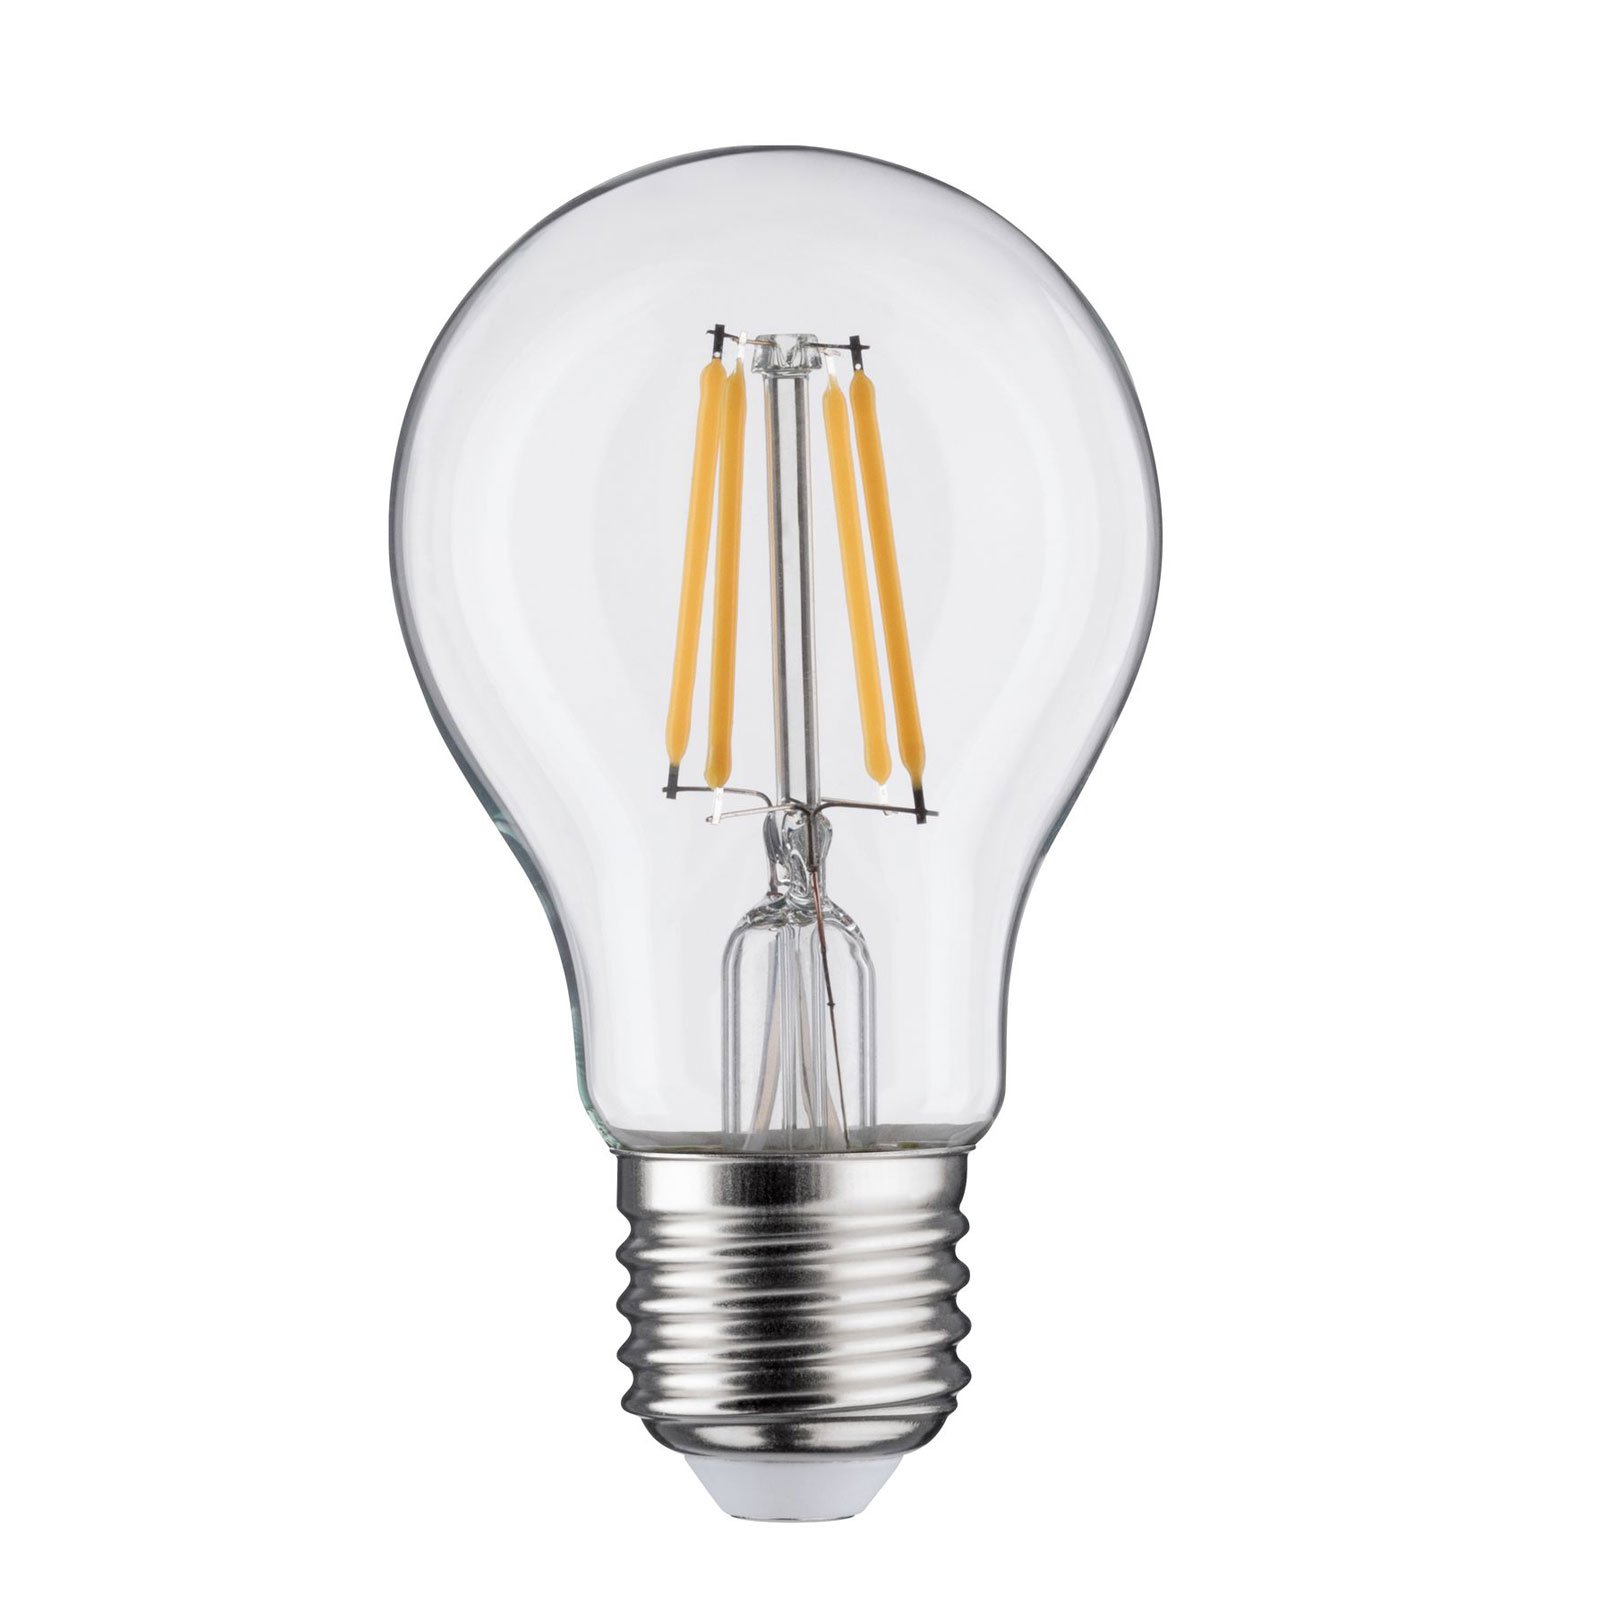 E27 LED bulb 5W filament 2,700K clear dimmable